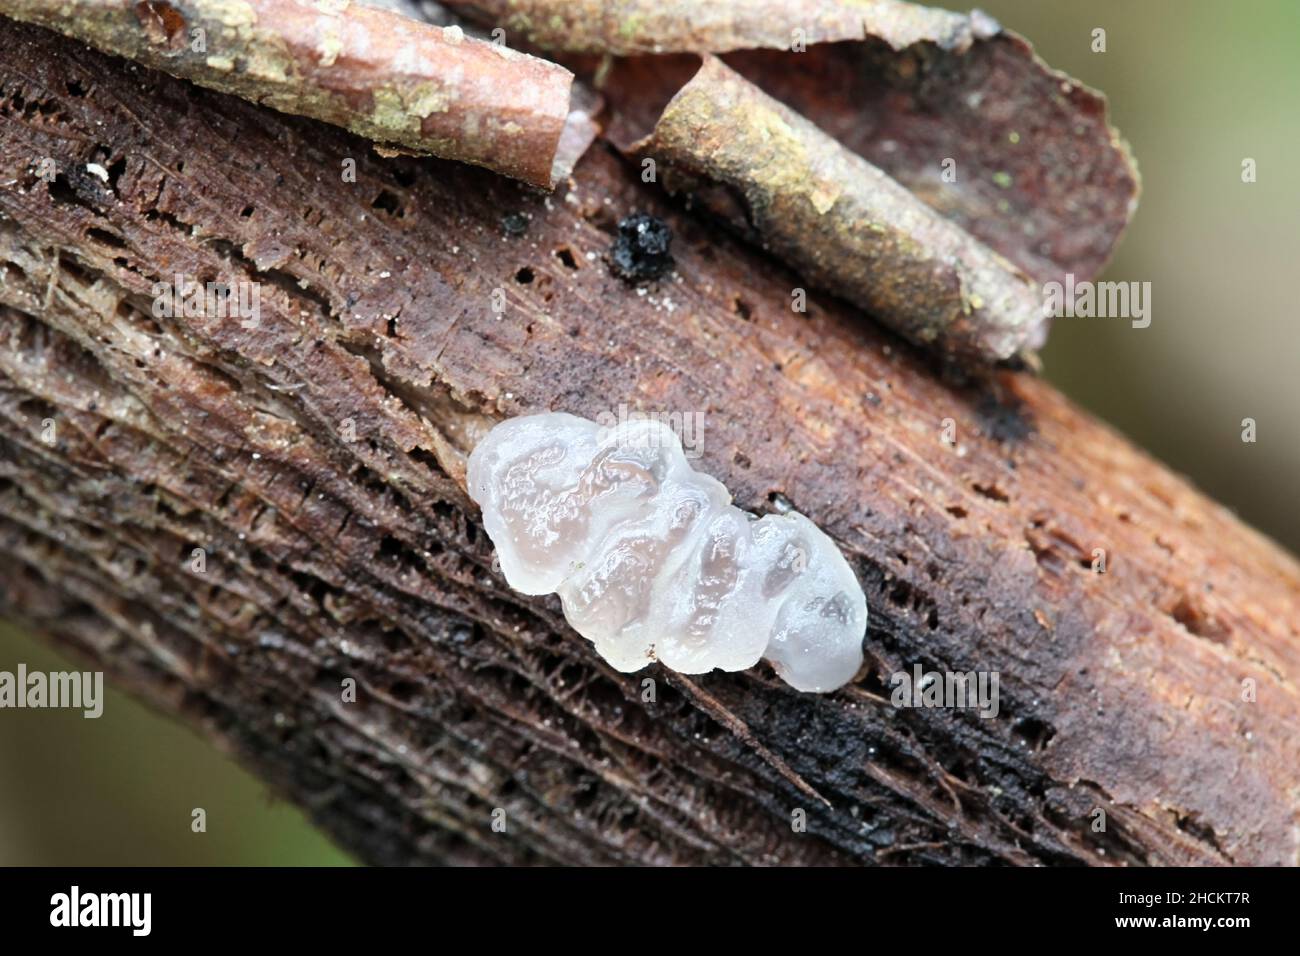 Myxarium nucleatum, also called Exidia nucleata, commonly known as crystal brain or granular jelly roll, wild fungus from Finland Stock Photo